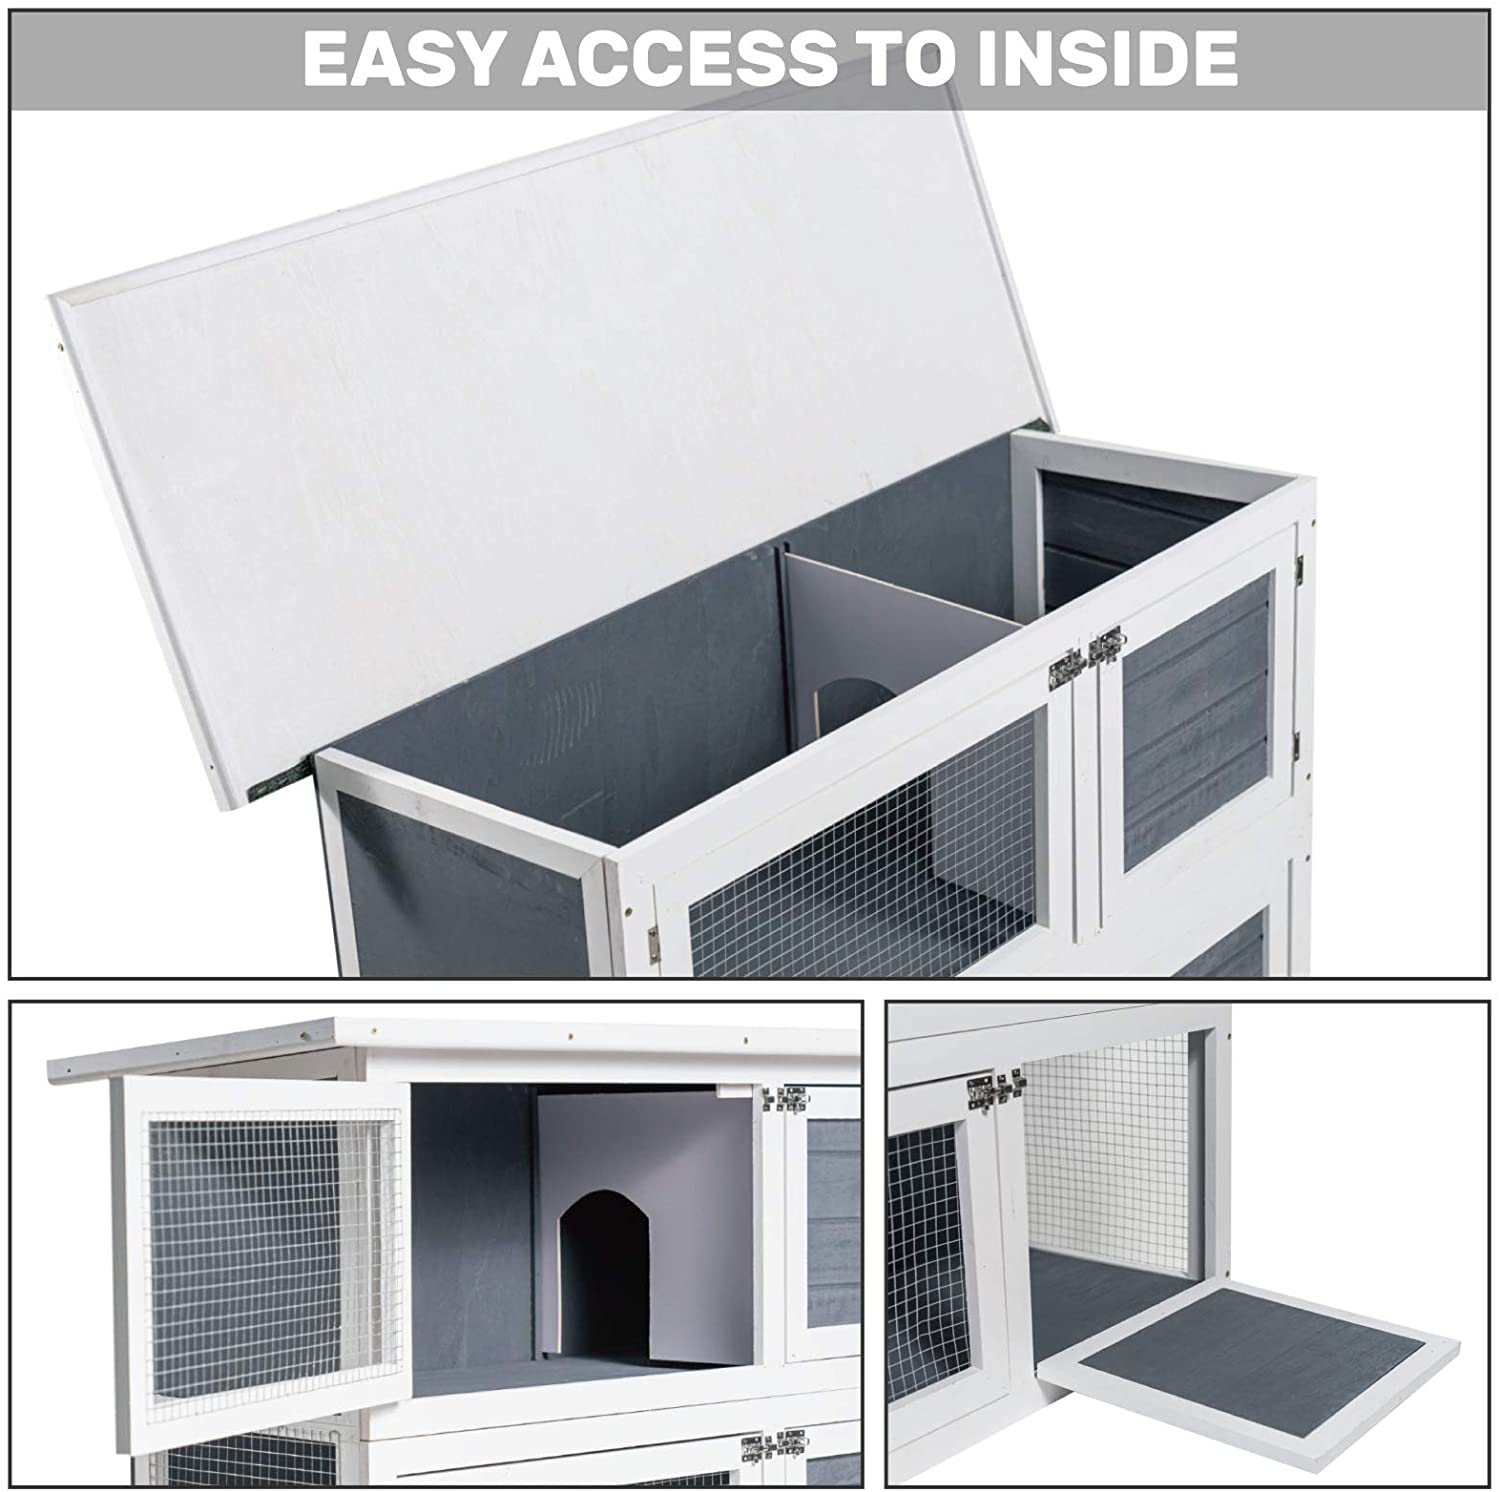 Aoxun 2 Story Rabbit Hutch Outdoor/Indoor Bunny Cage, Guinea Pig Cage Wooden Rabbit House Small Animal Cage with Trays, 41Inch (Grey) Animals & Pet Supplies > Pet Supplies > Small Animal Supplies > Small Animal Habitats & Cages Aoxun   